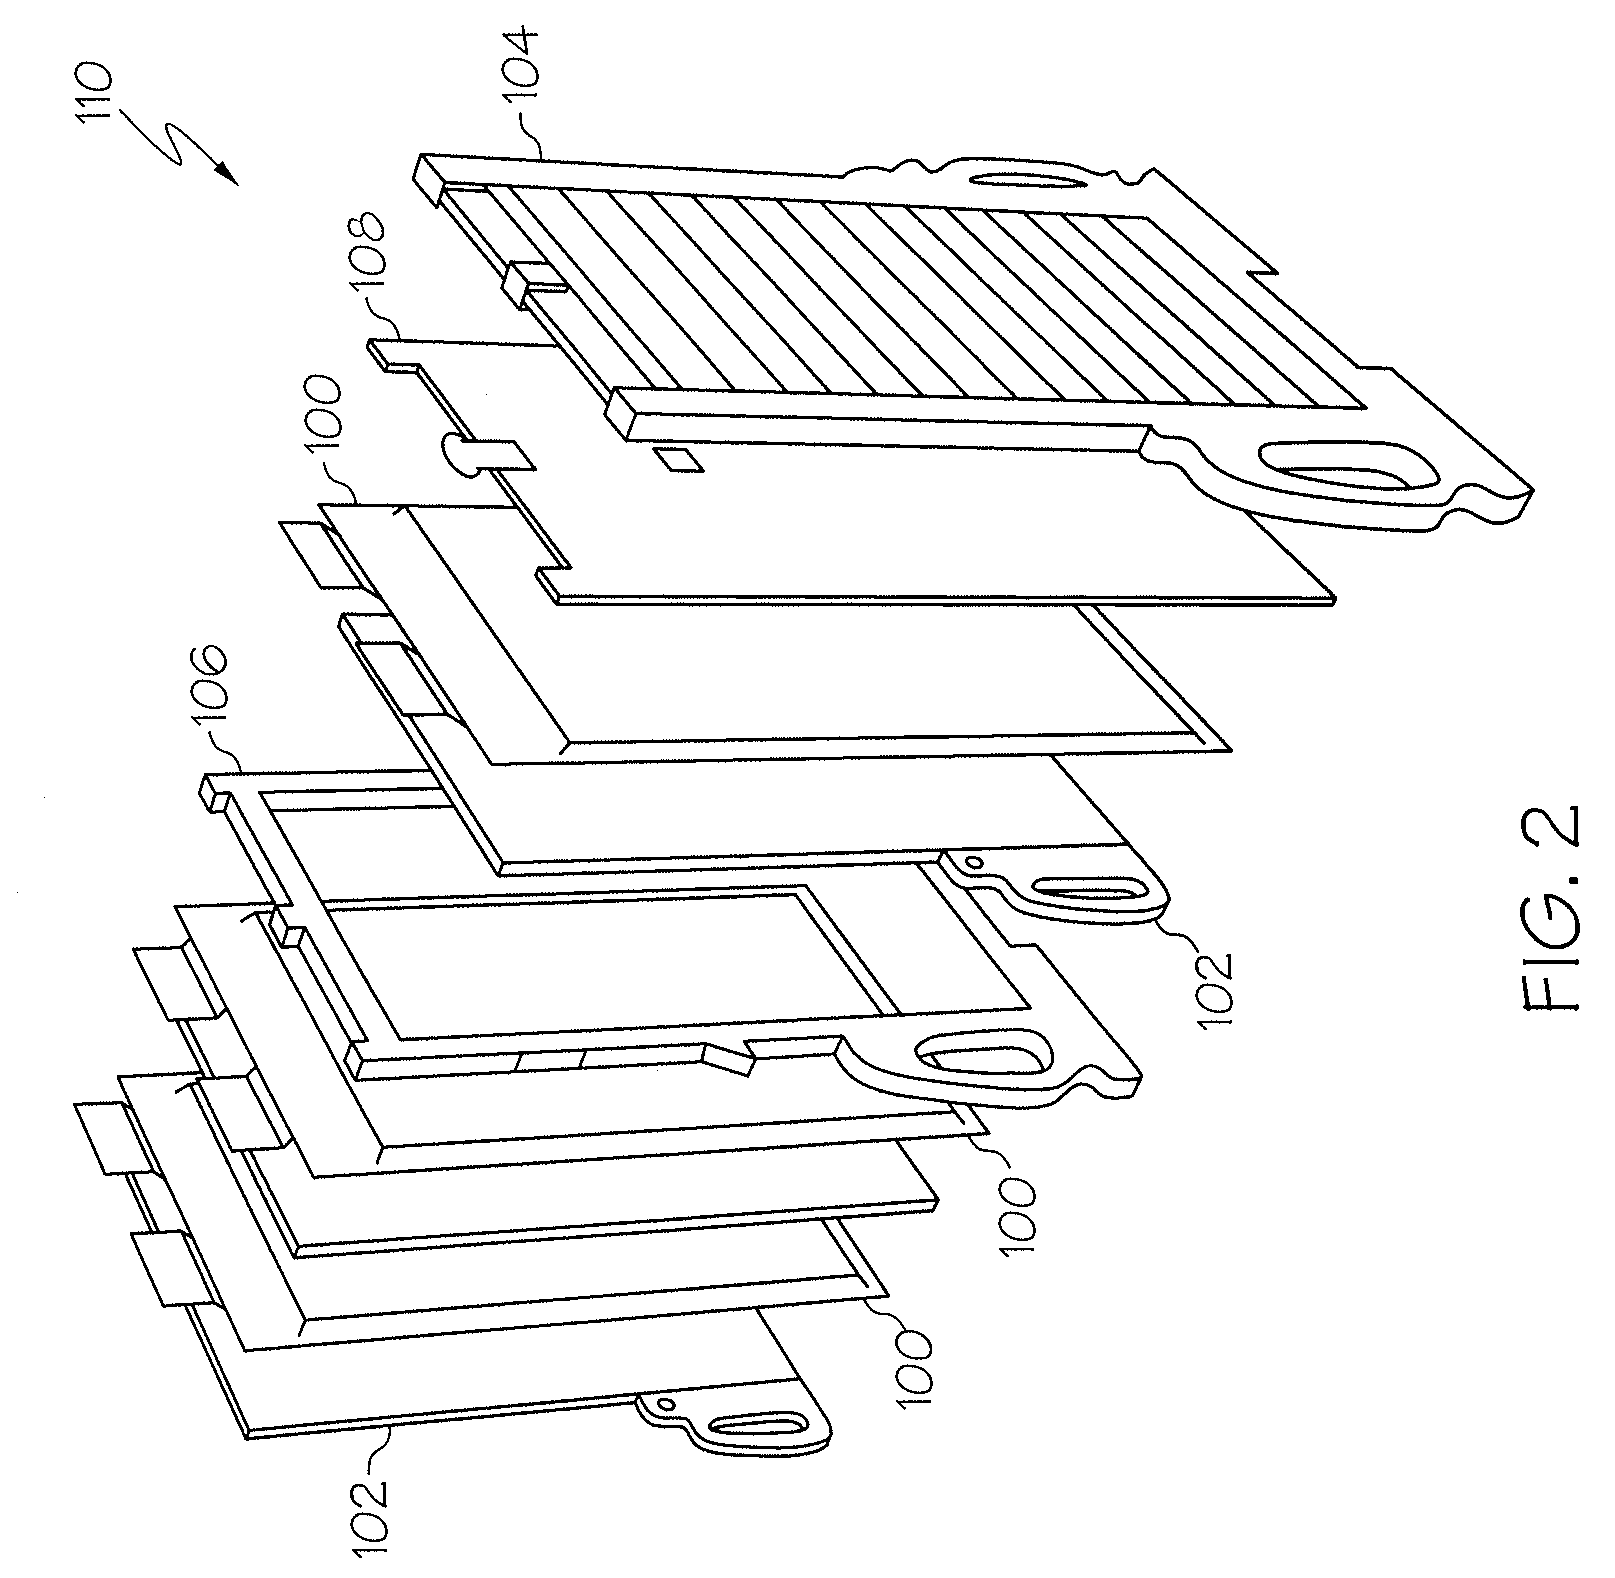 Large format cell handling for high speed assembly